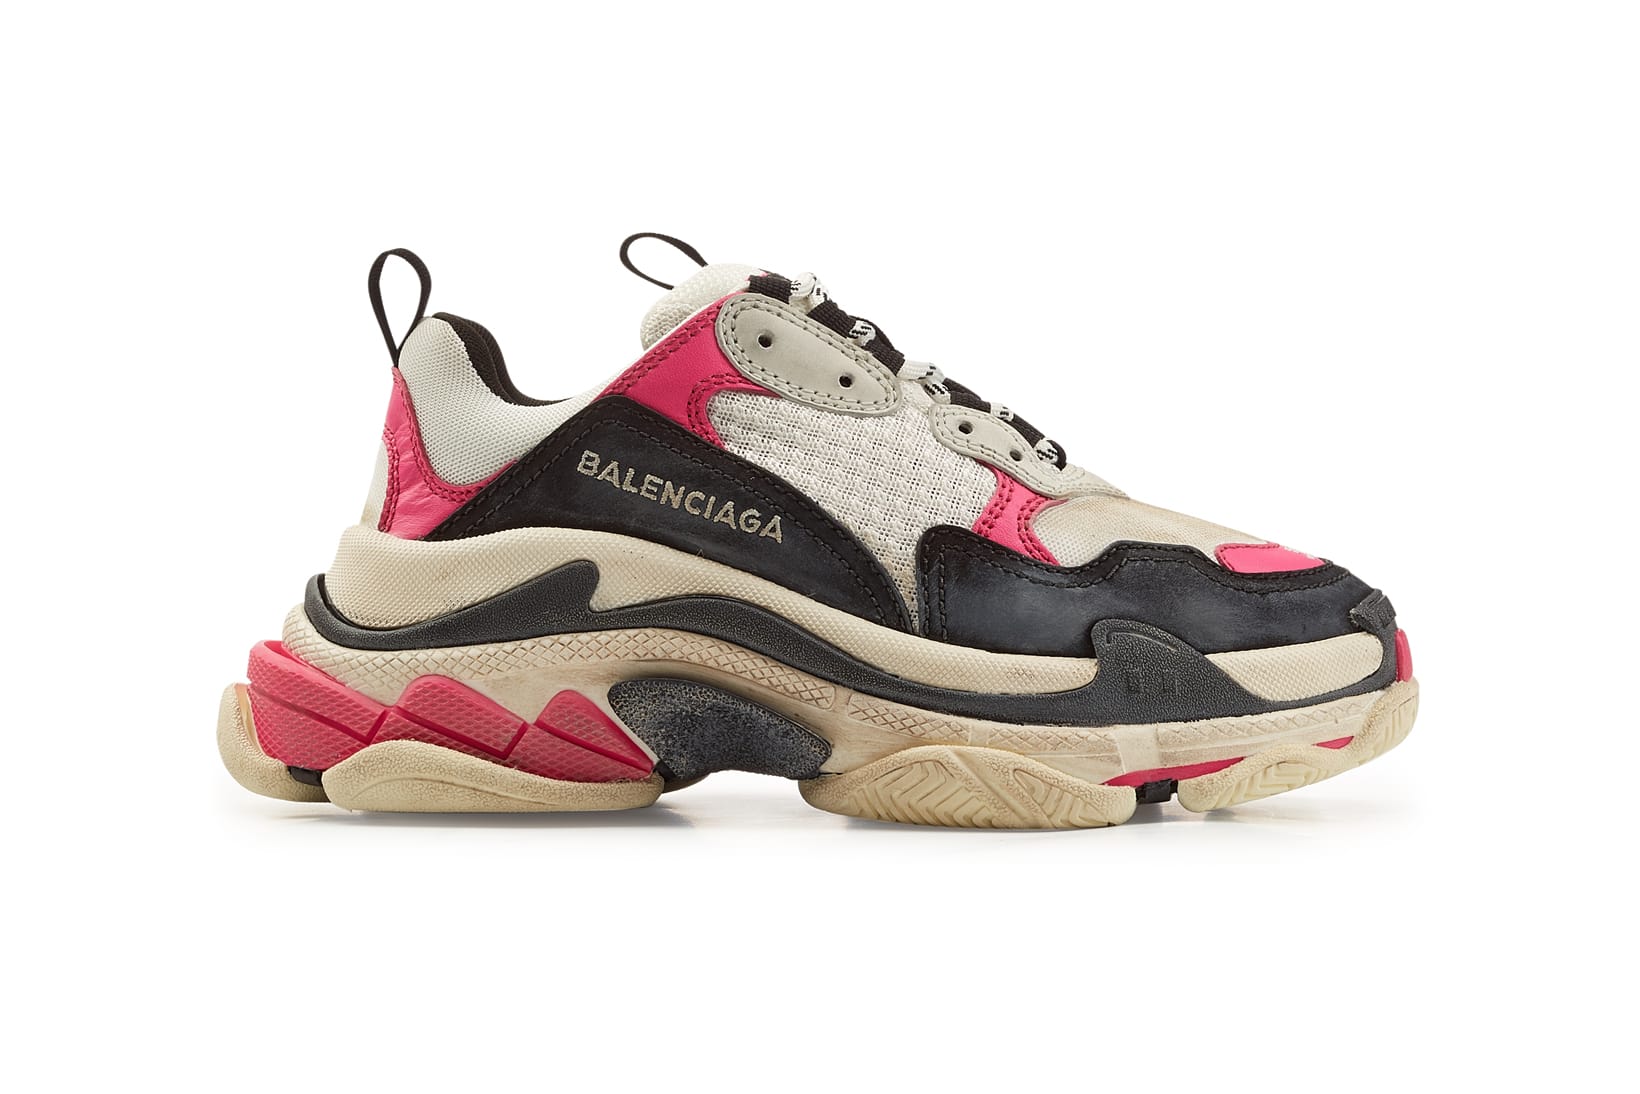 How to get New Balenciaga Triple S Trainers Sliver Pinterest